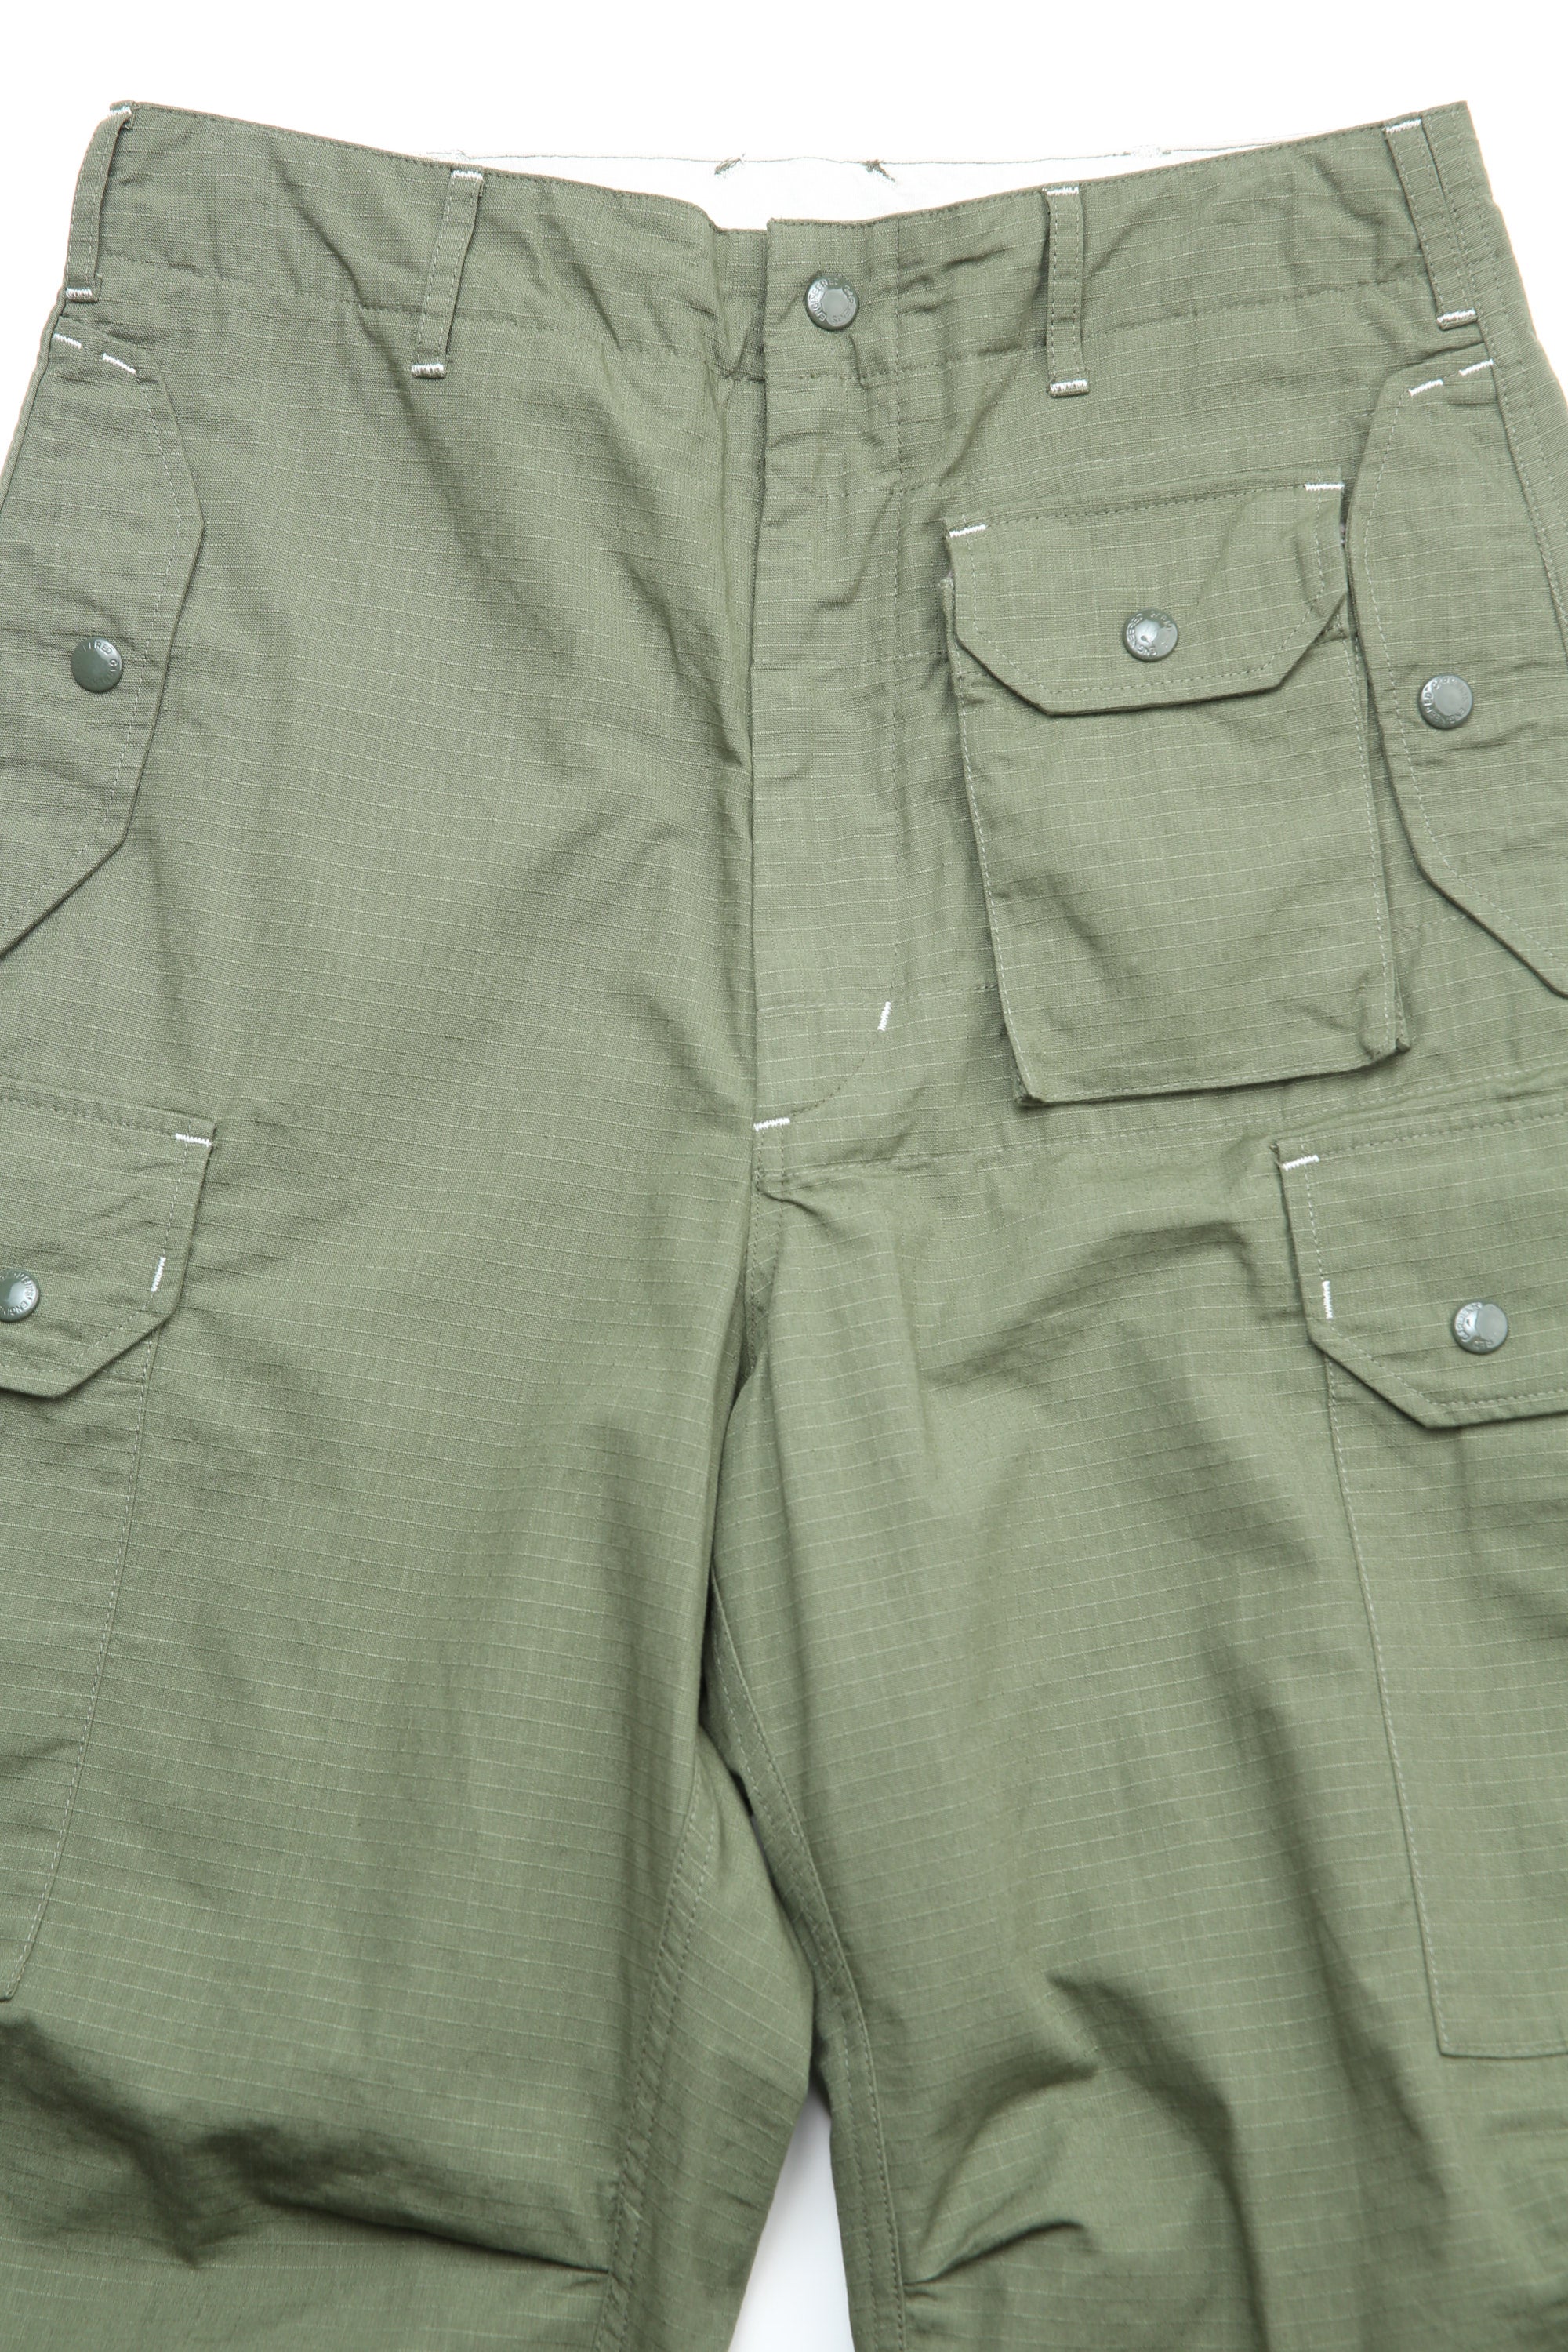 Engineered Garments X Totem FU Over Pants - Olive Ripstop